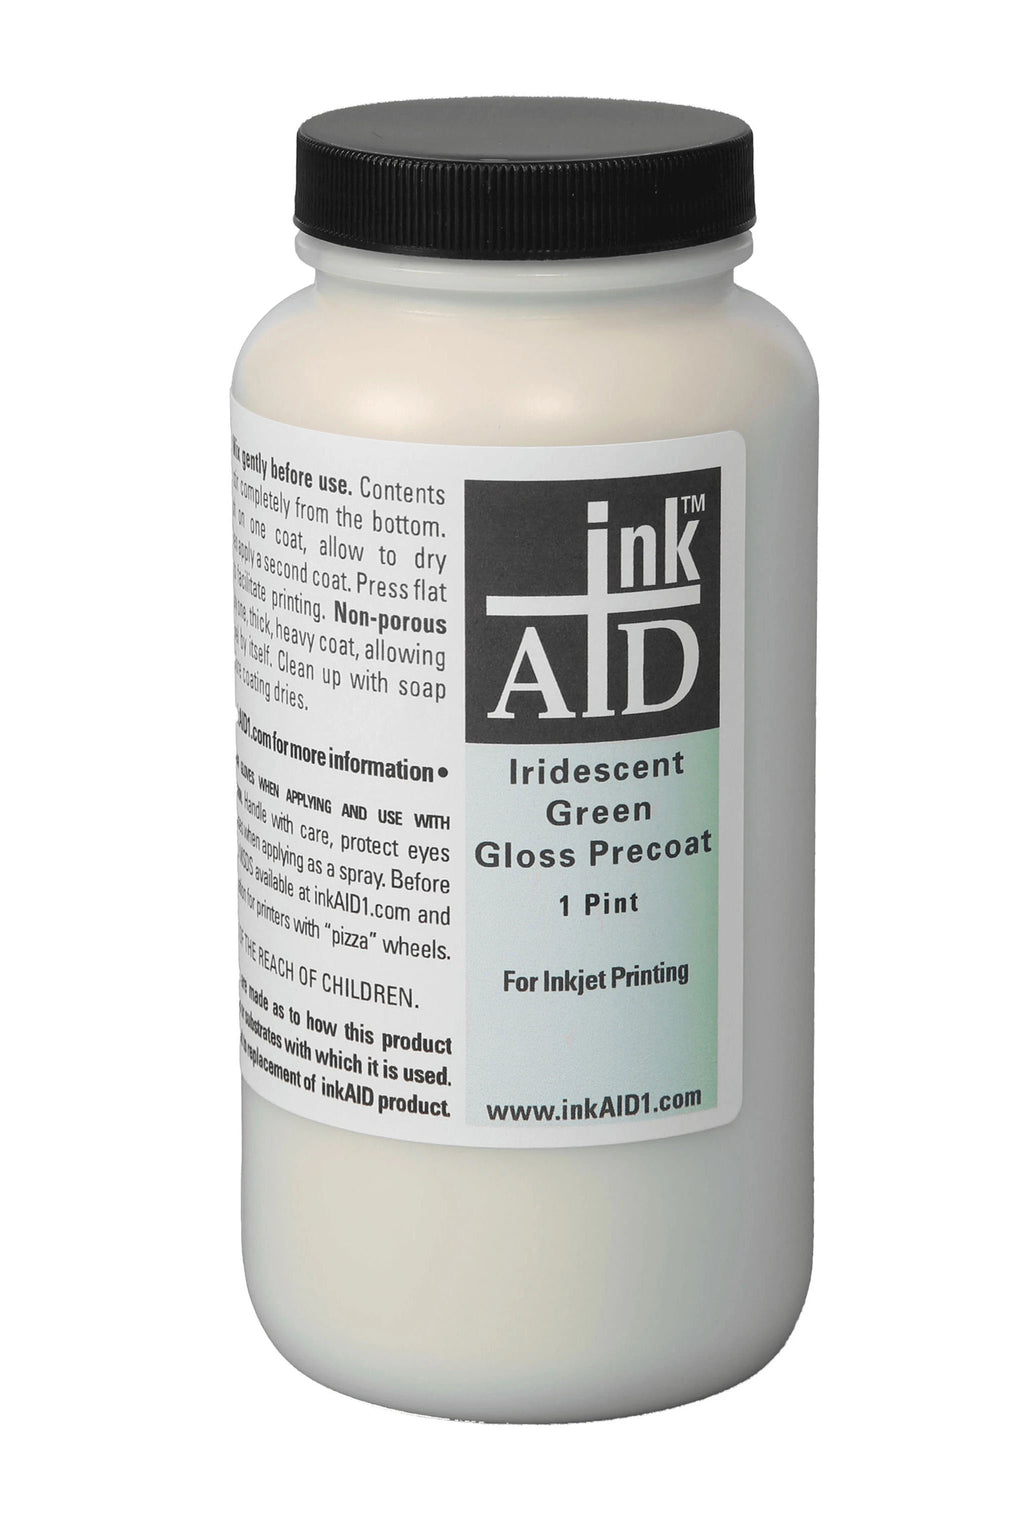 inkAID Iridescent Green inkjet, ink receptive coating can be applied to any material that can go through your inkjet printer. It provides a glowing, reflective, iridescent surface that enhances the color of the ink, which changes slightly as you adjust your viewing angle. Works well in digital mixed media art.